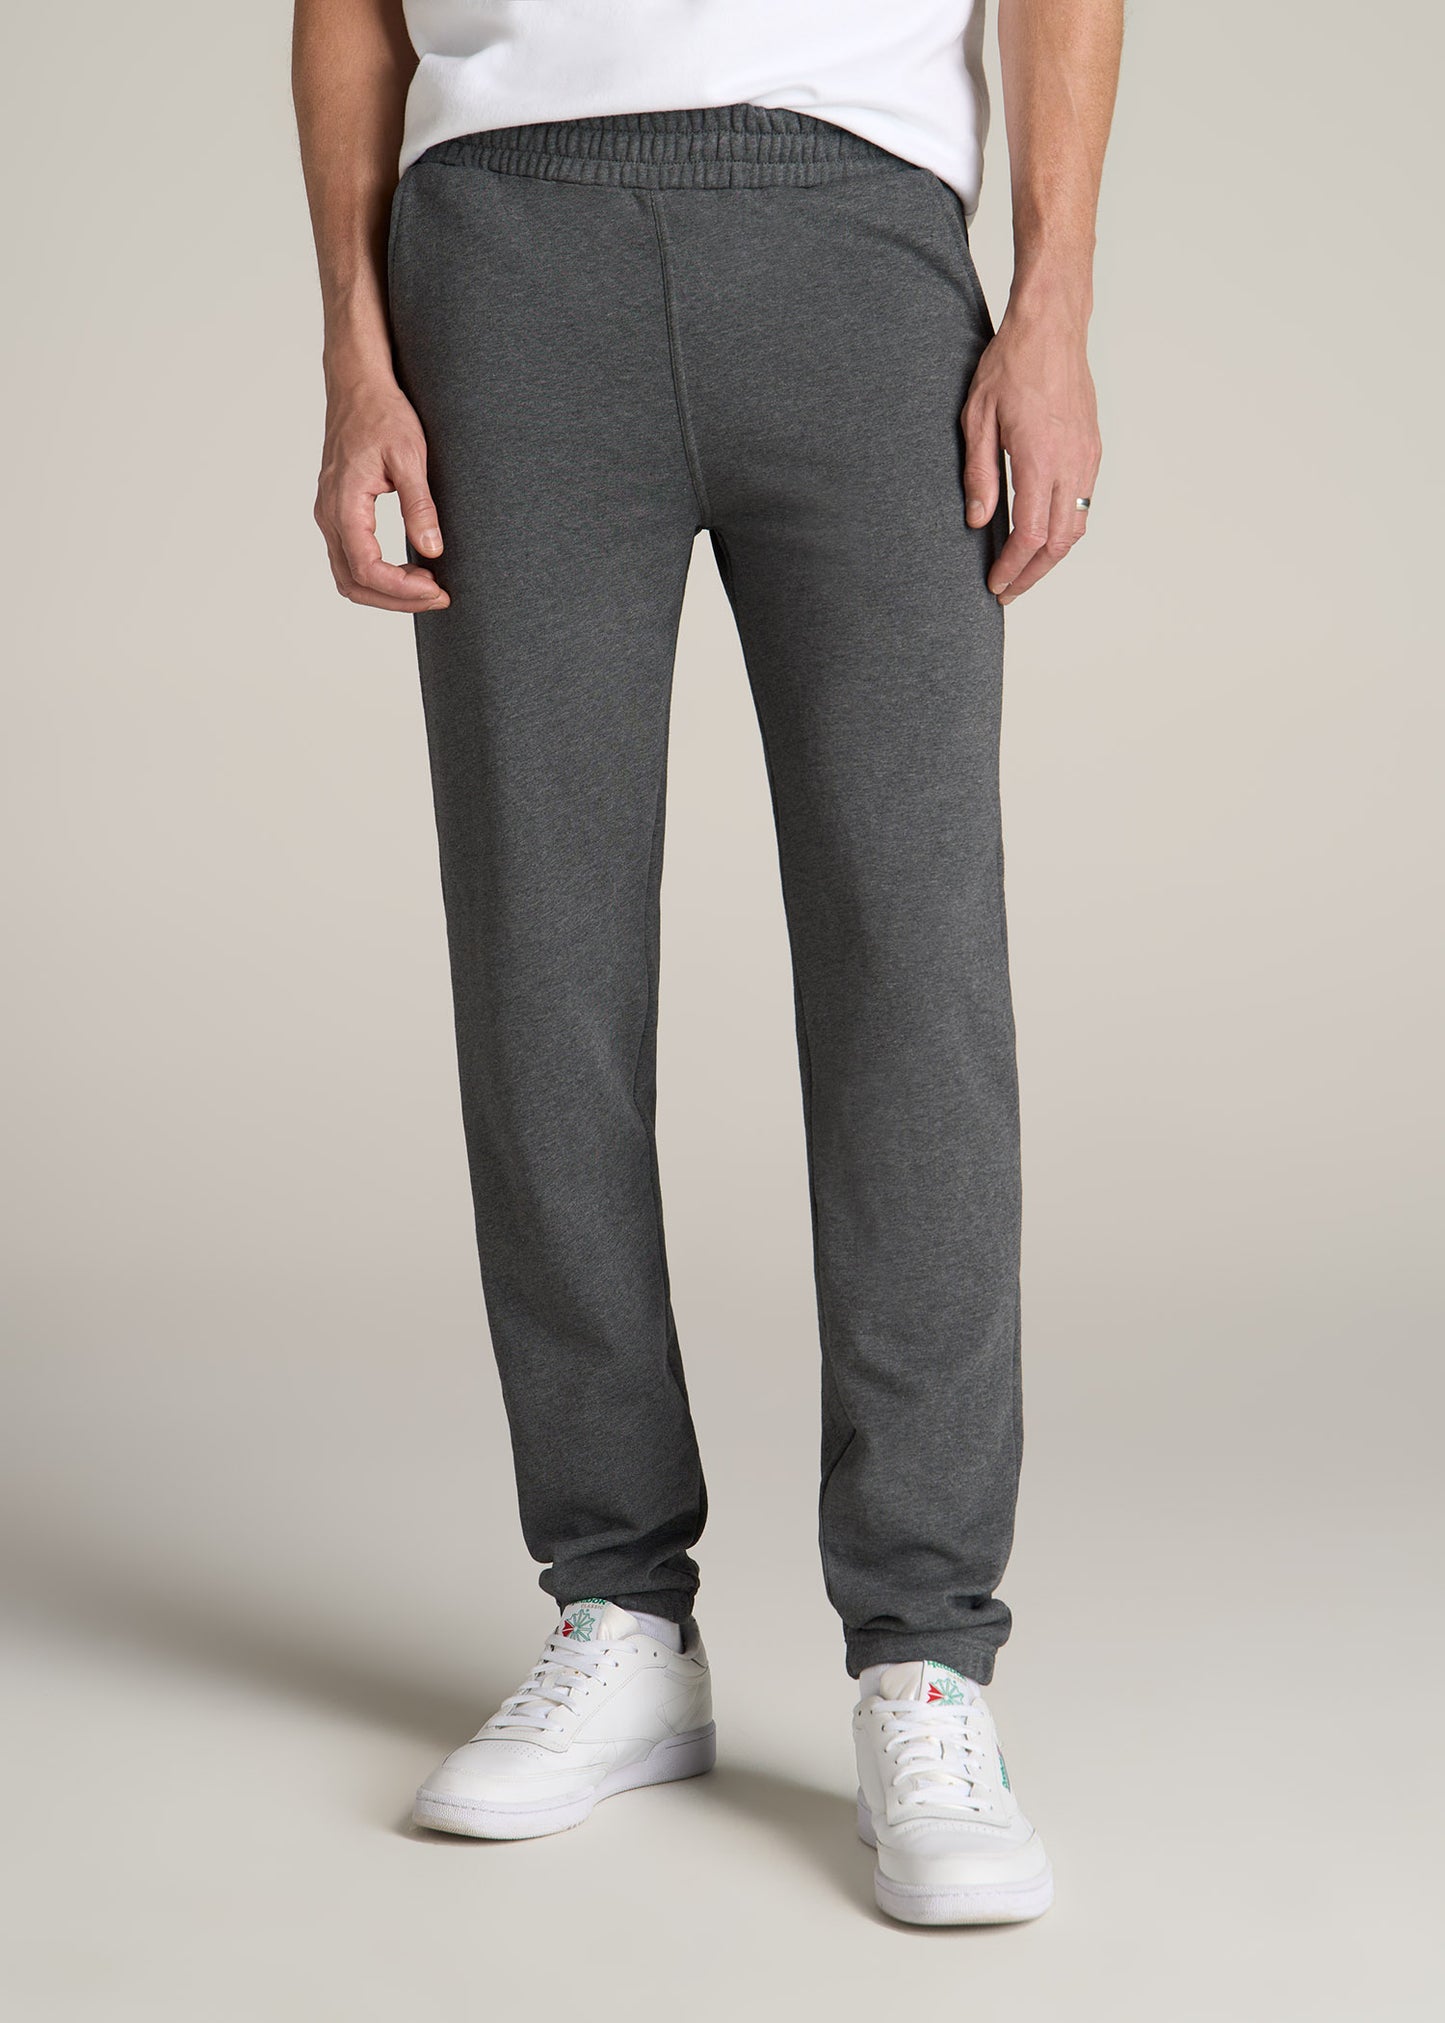 Tall man wearing American Tall's Wearever French Terry Sweatpants in the color Charcoal Mix.